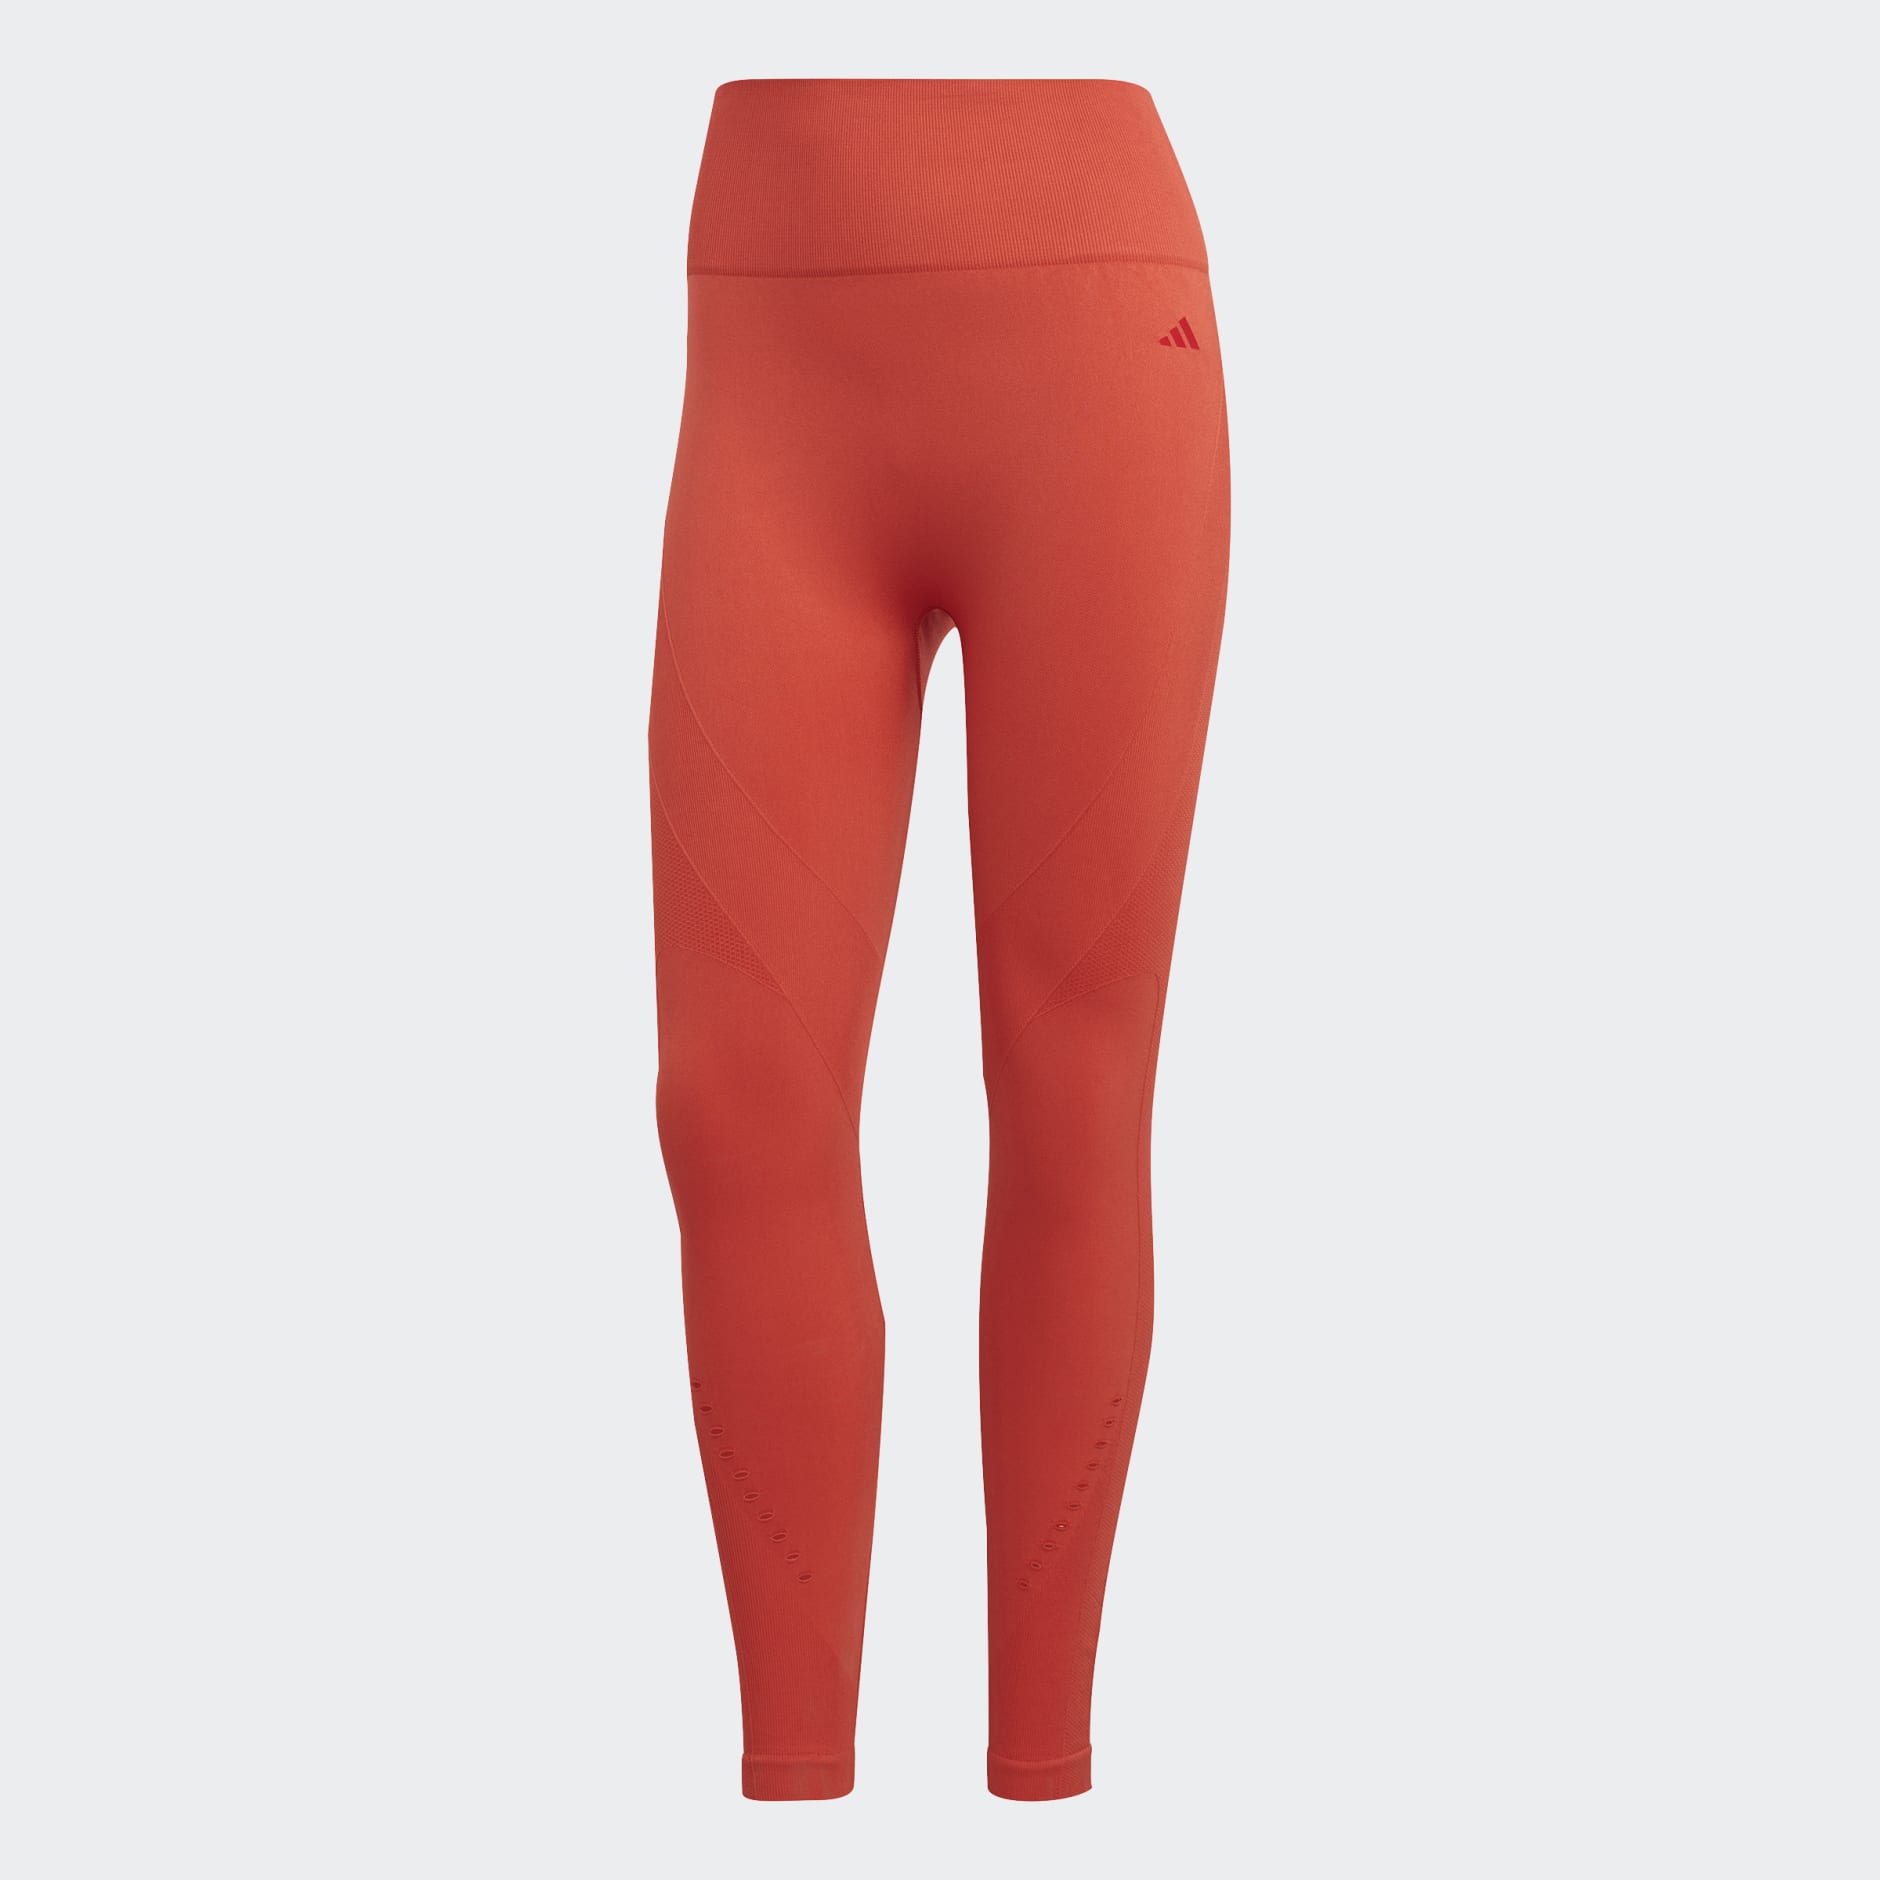 Share more than 229 red adidas leggings latest